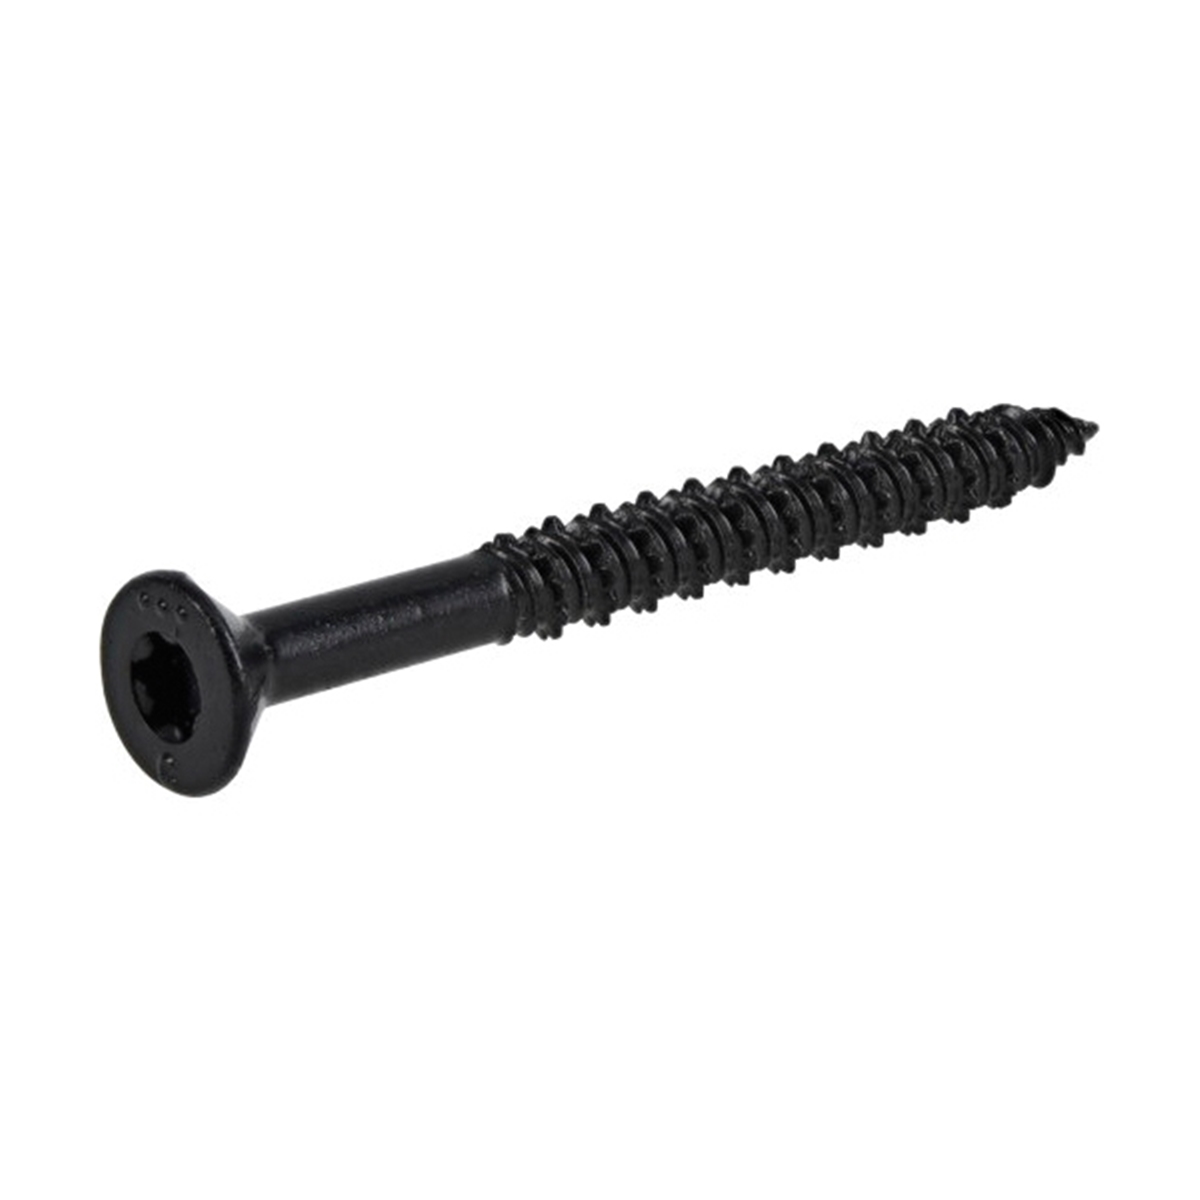 376608 Concrete Screw Anchor, 1/4 in Dia, 2-3/4 in L, Carbon Steel, Epoxy-Coated, 100/PK